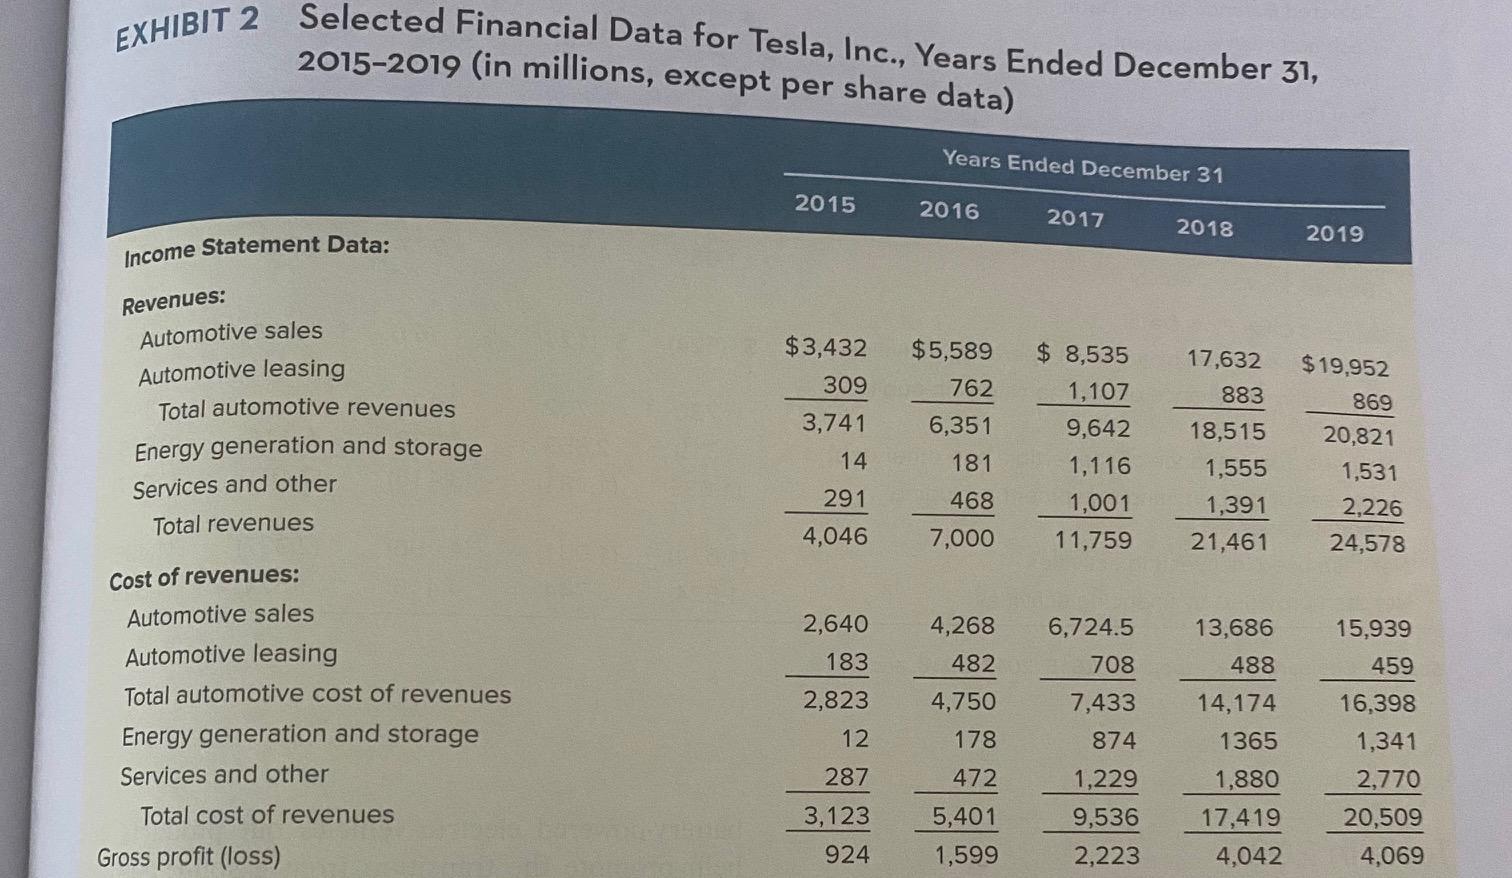 EXHIBIT 2 Selected Financial Data for Tesla, Inc., Years Ended December 31, 2015-2019 (in millions, except per sharo dat-1